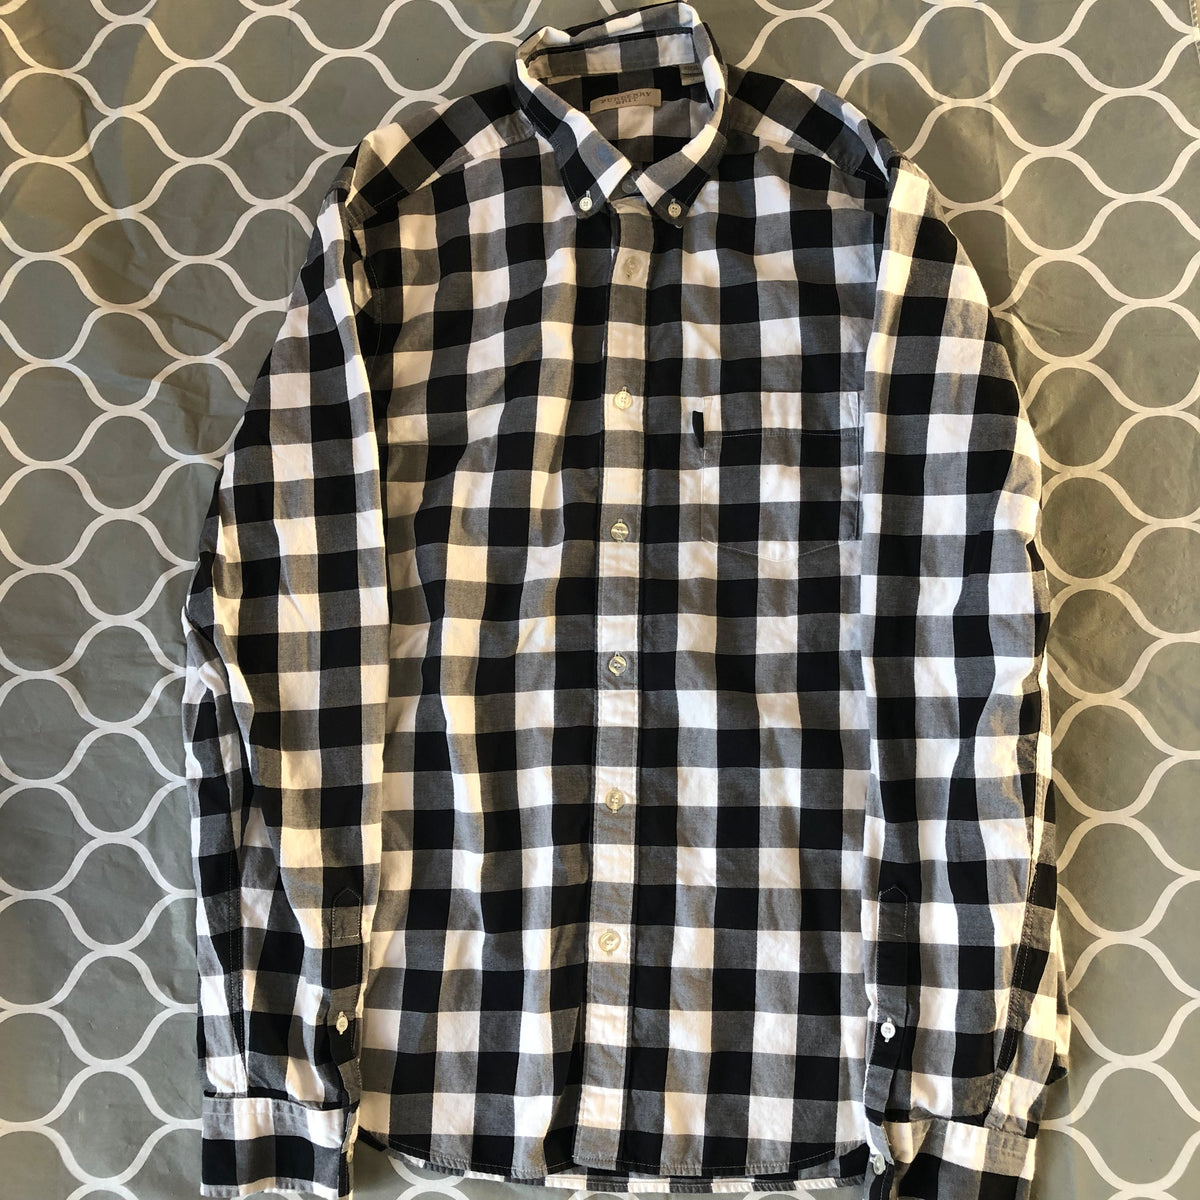 burberry black and white